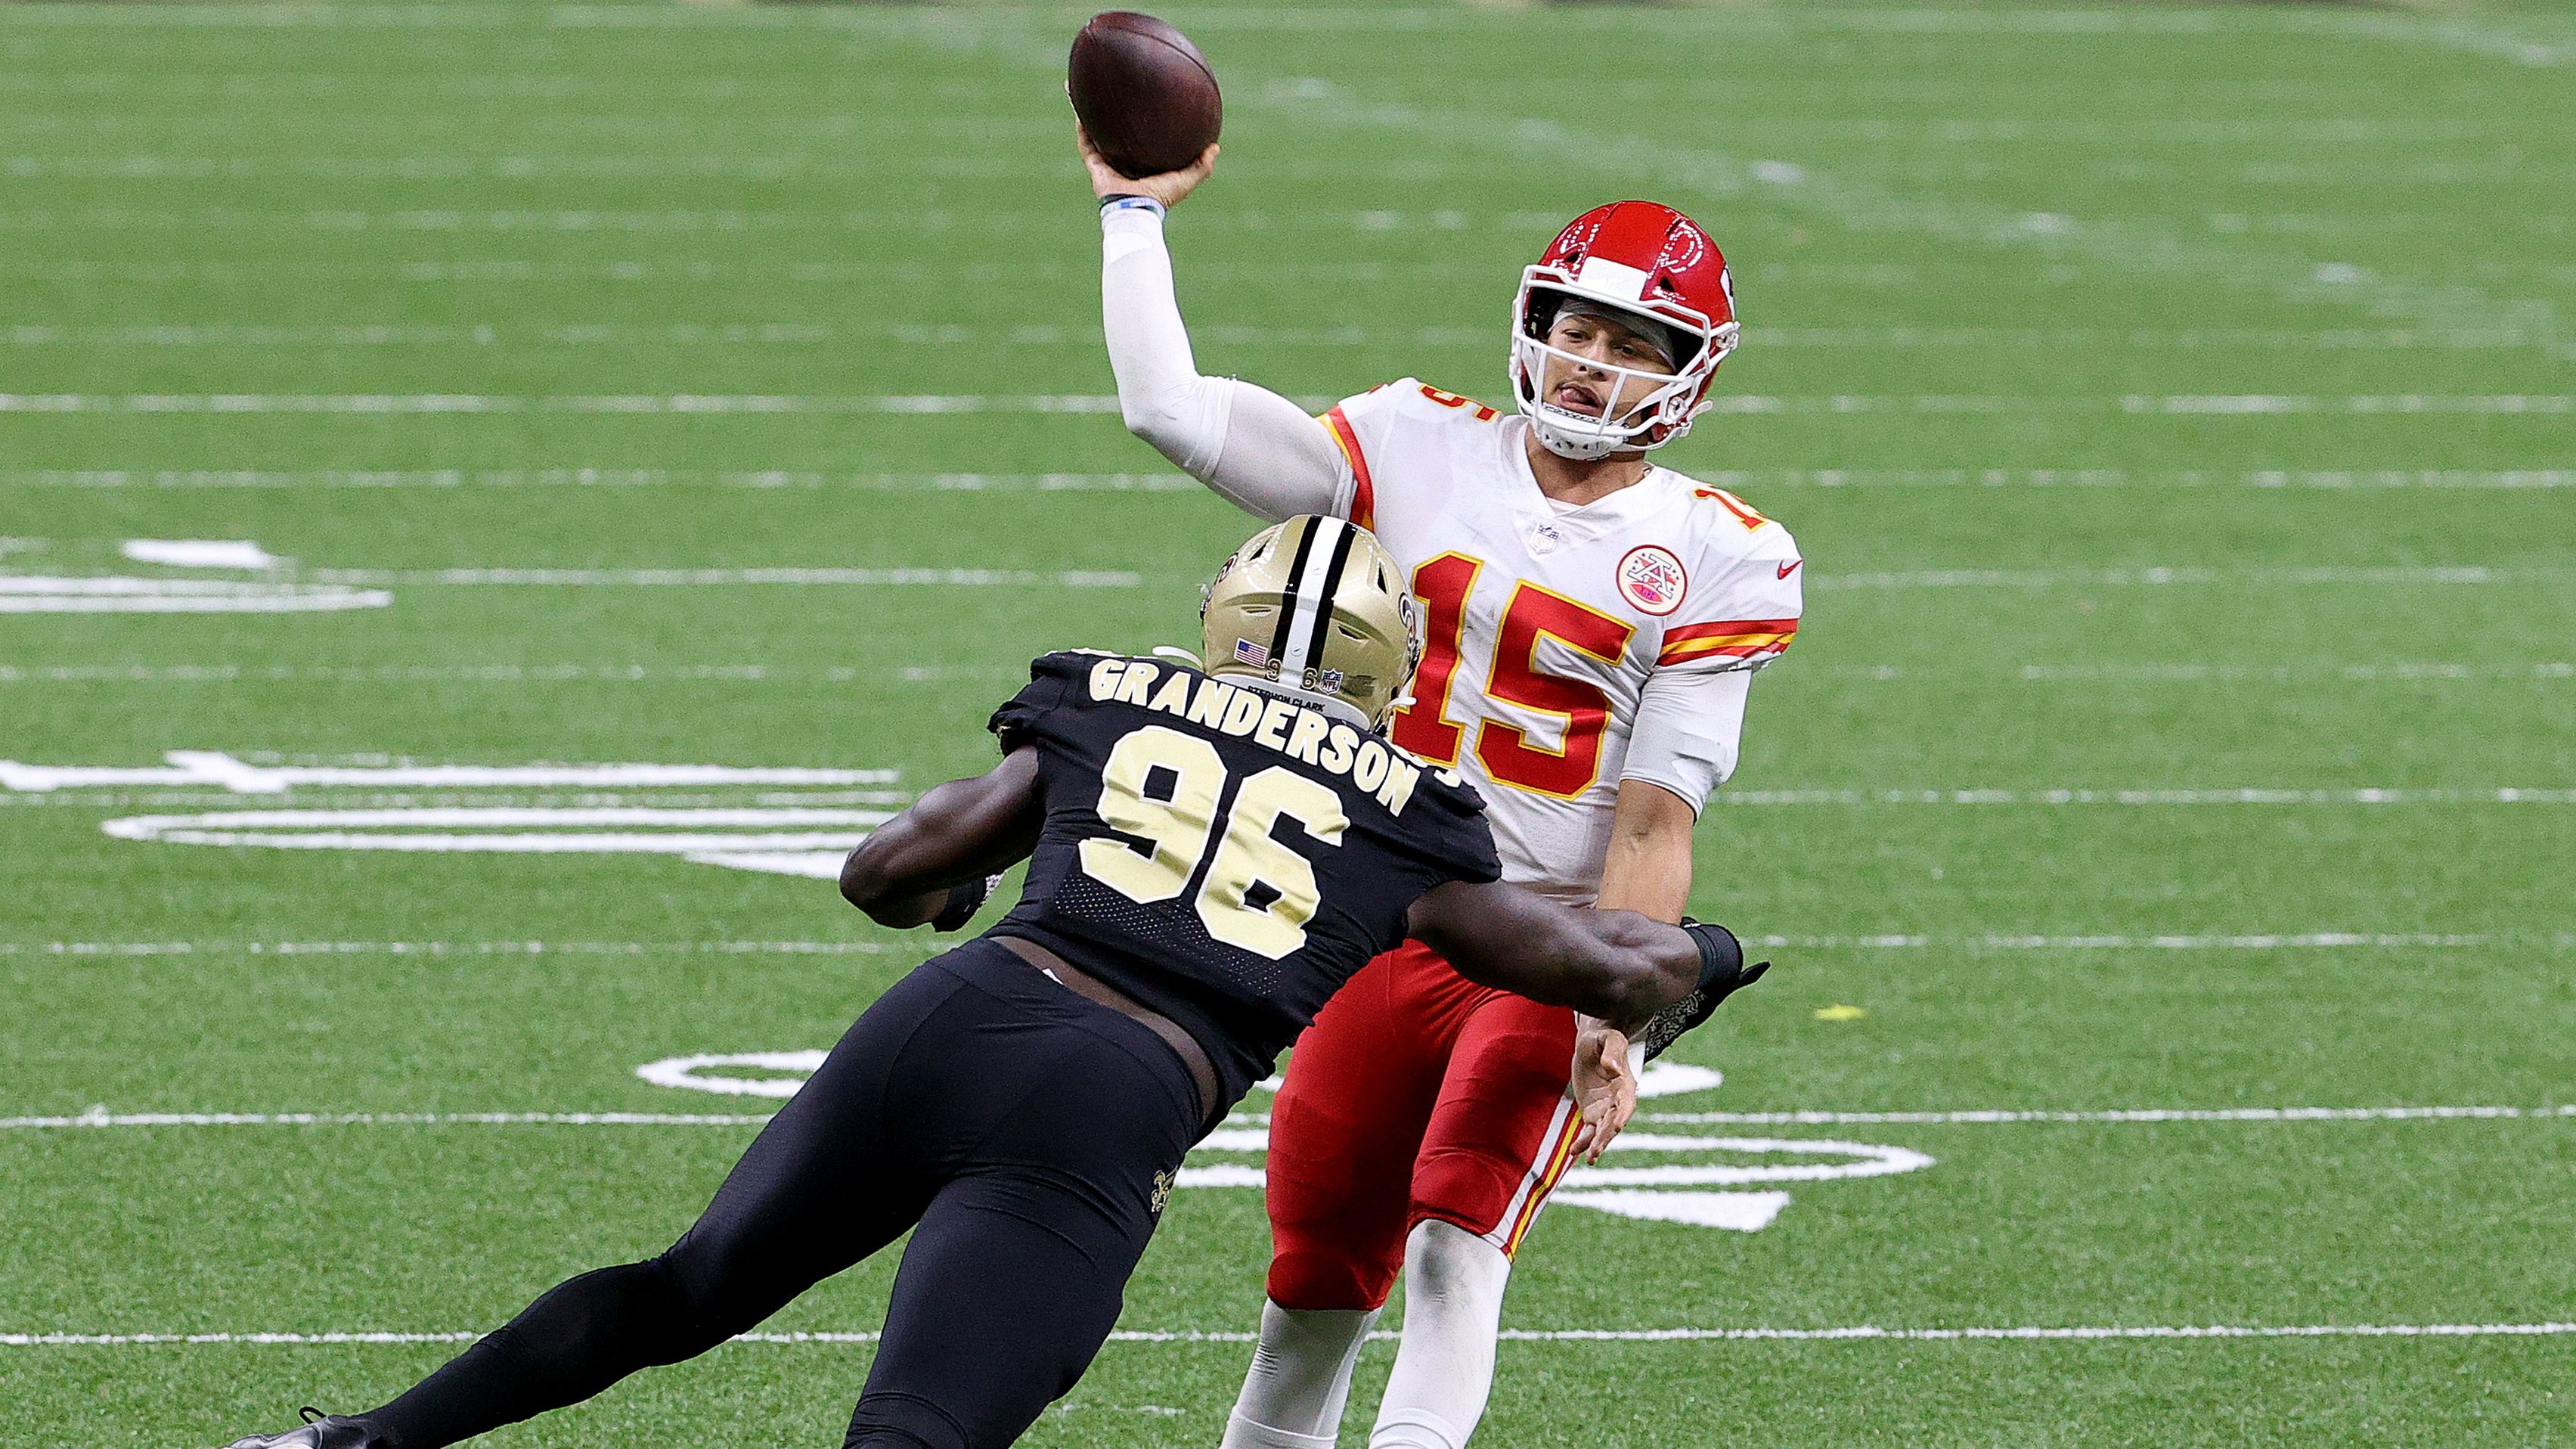 Patrick Mahomes dazzles yet again to lead the Kansas City Chiefs past the New Orleans Saints in NFL week 15